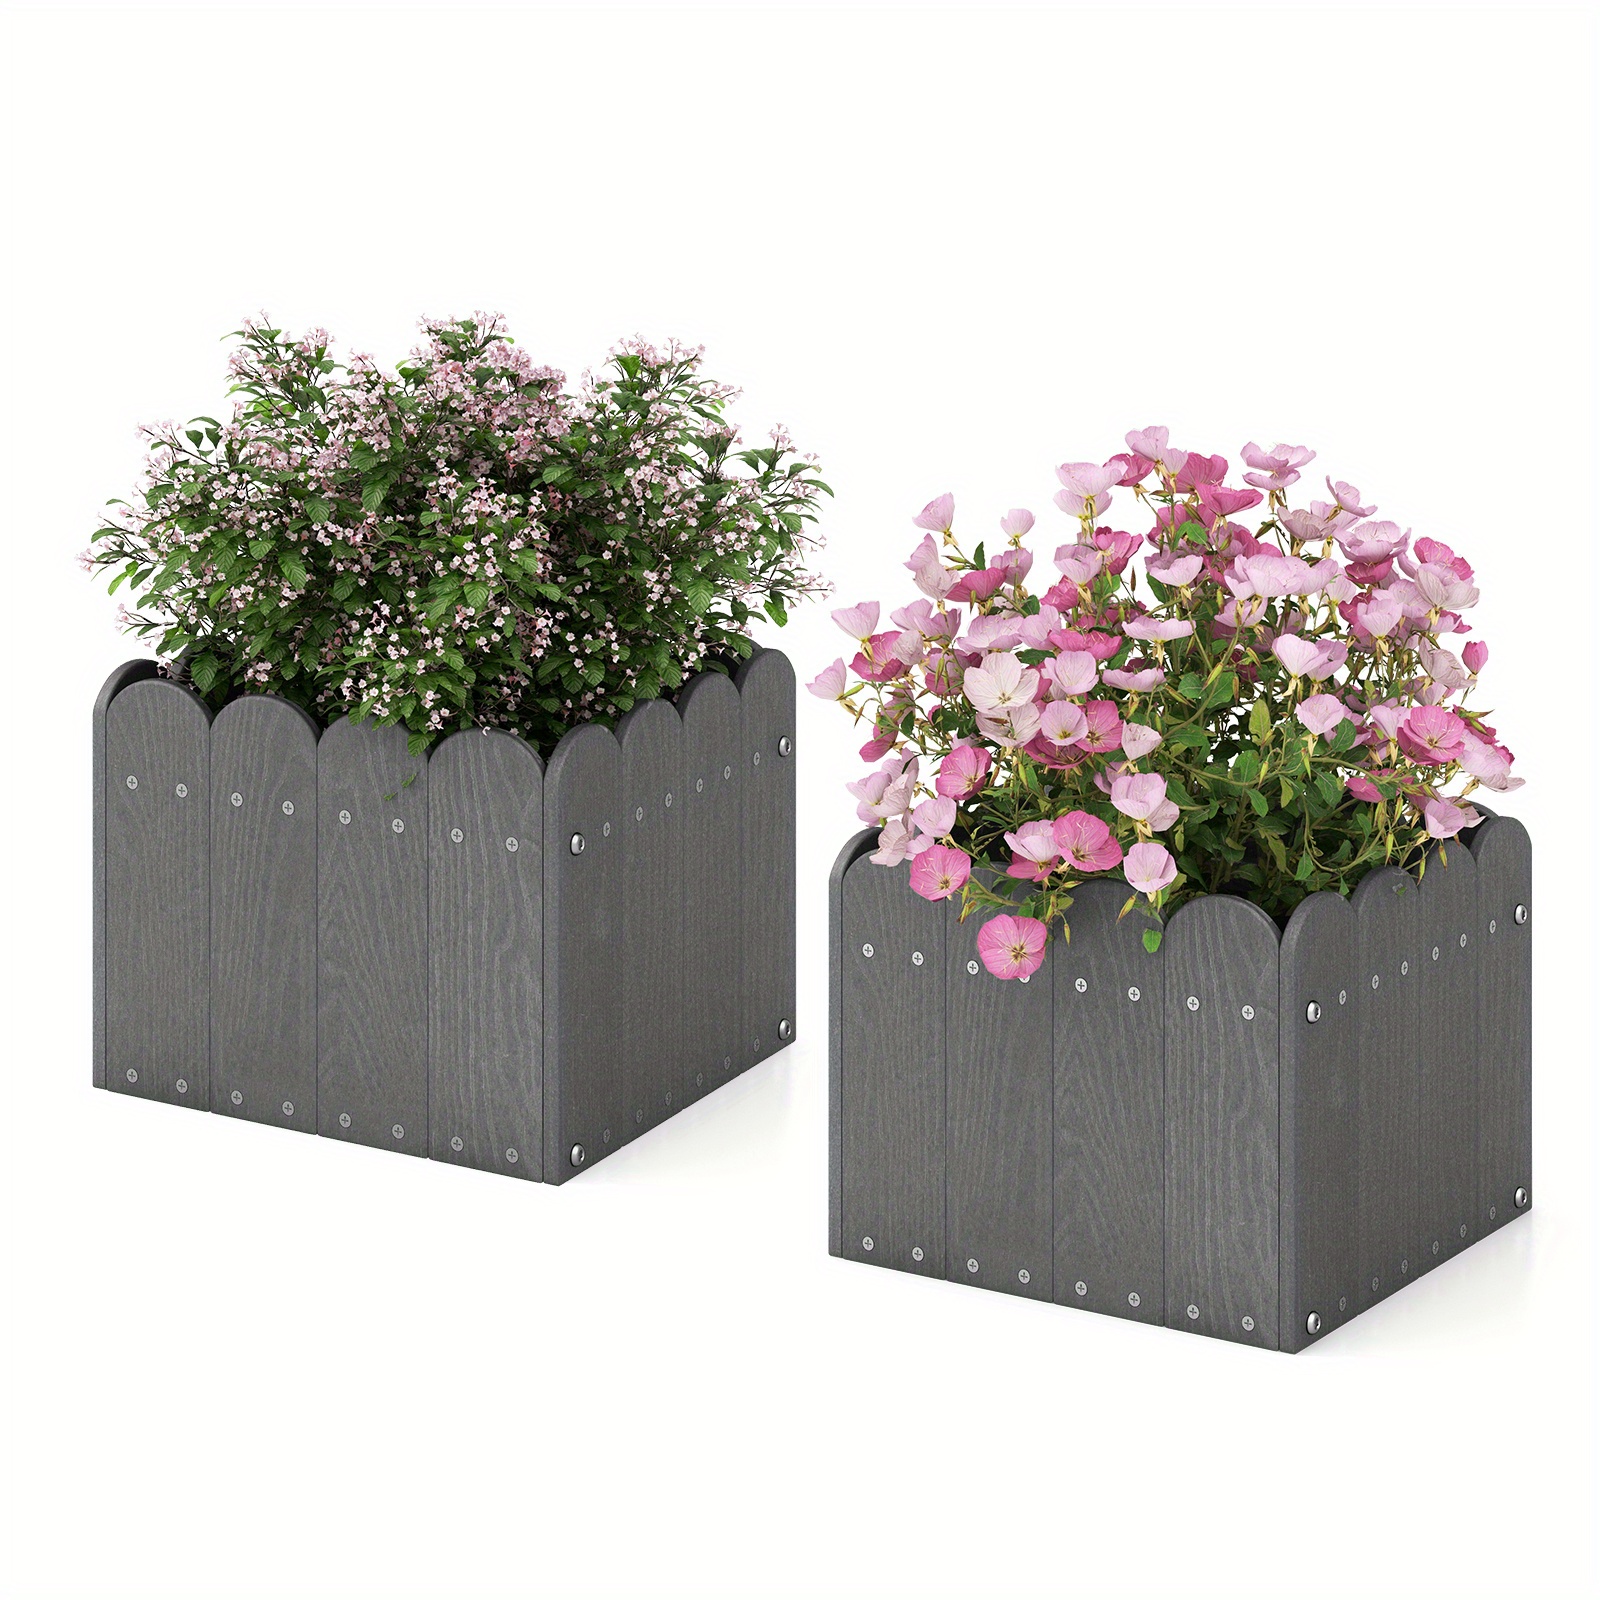 

Goplus 2 Pack Square Planter Box Weather-resistant Hdpe Flower Pot Garden Bed Grey